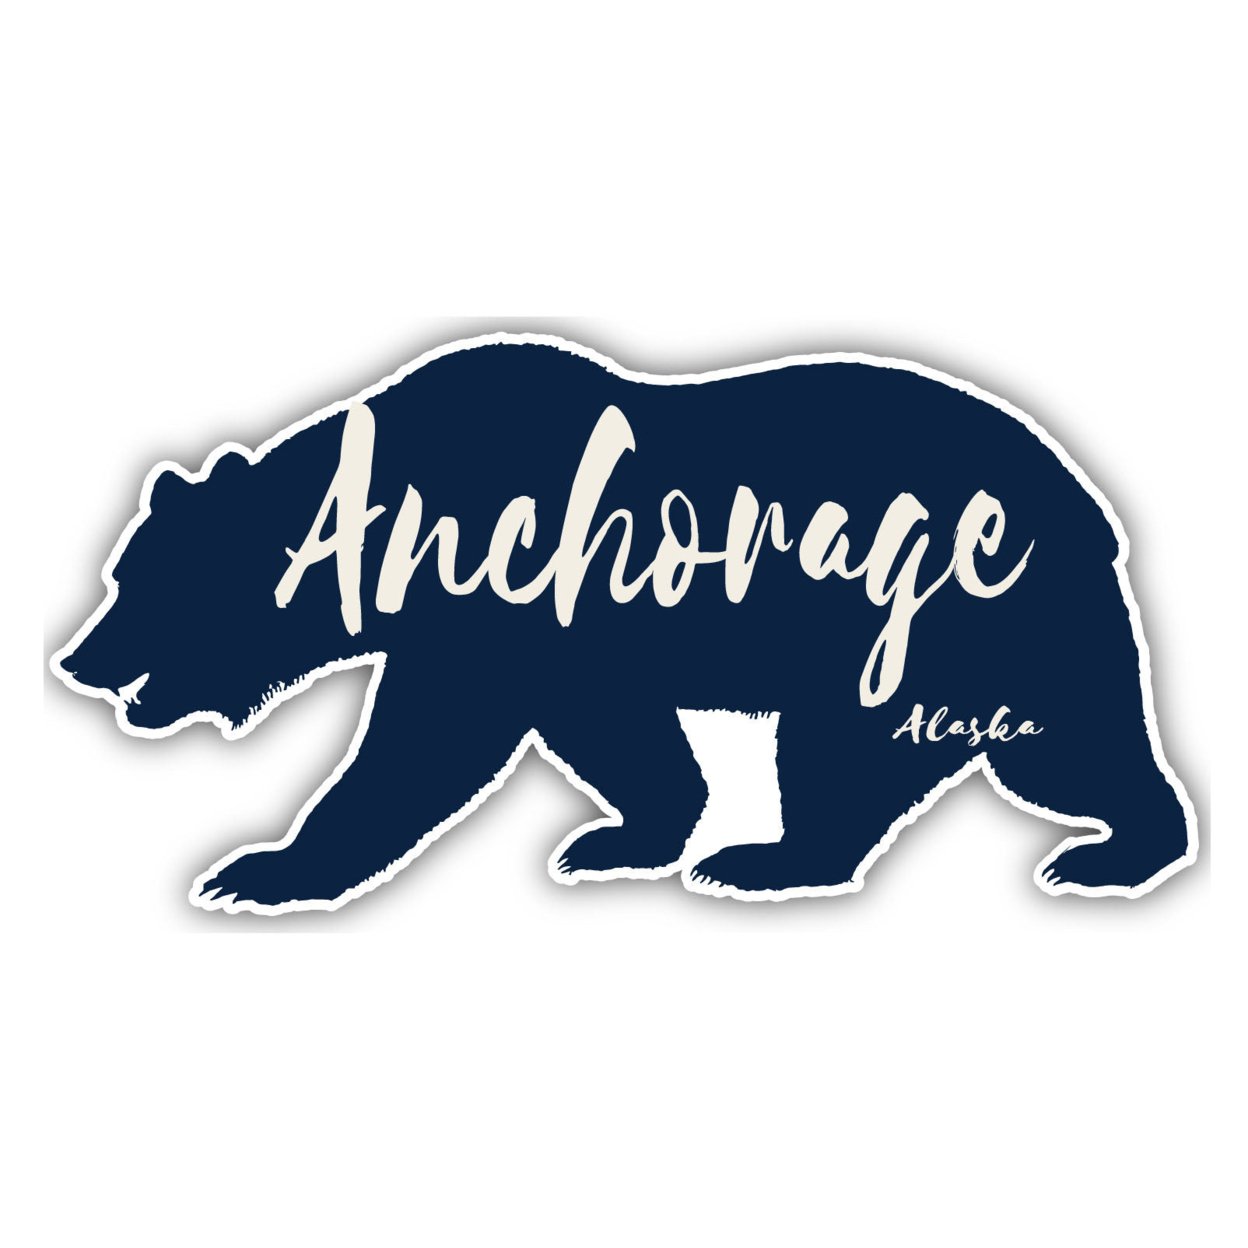 Anchorage Alaska Souvenir Decorative Stickers (Choose Theme And Size) - Single Unit, 2-Inch, Great Outdoors